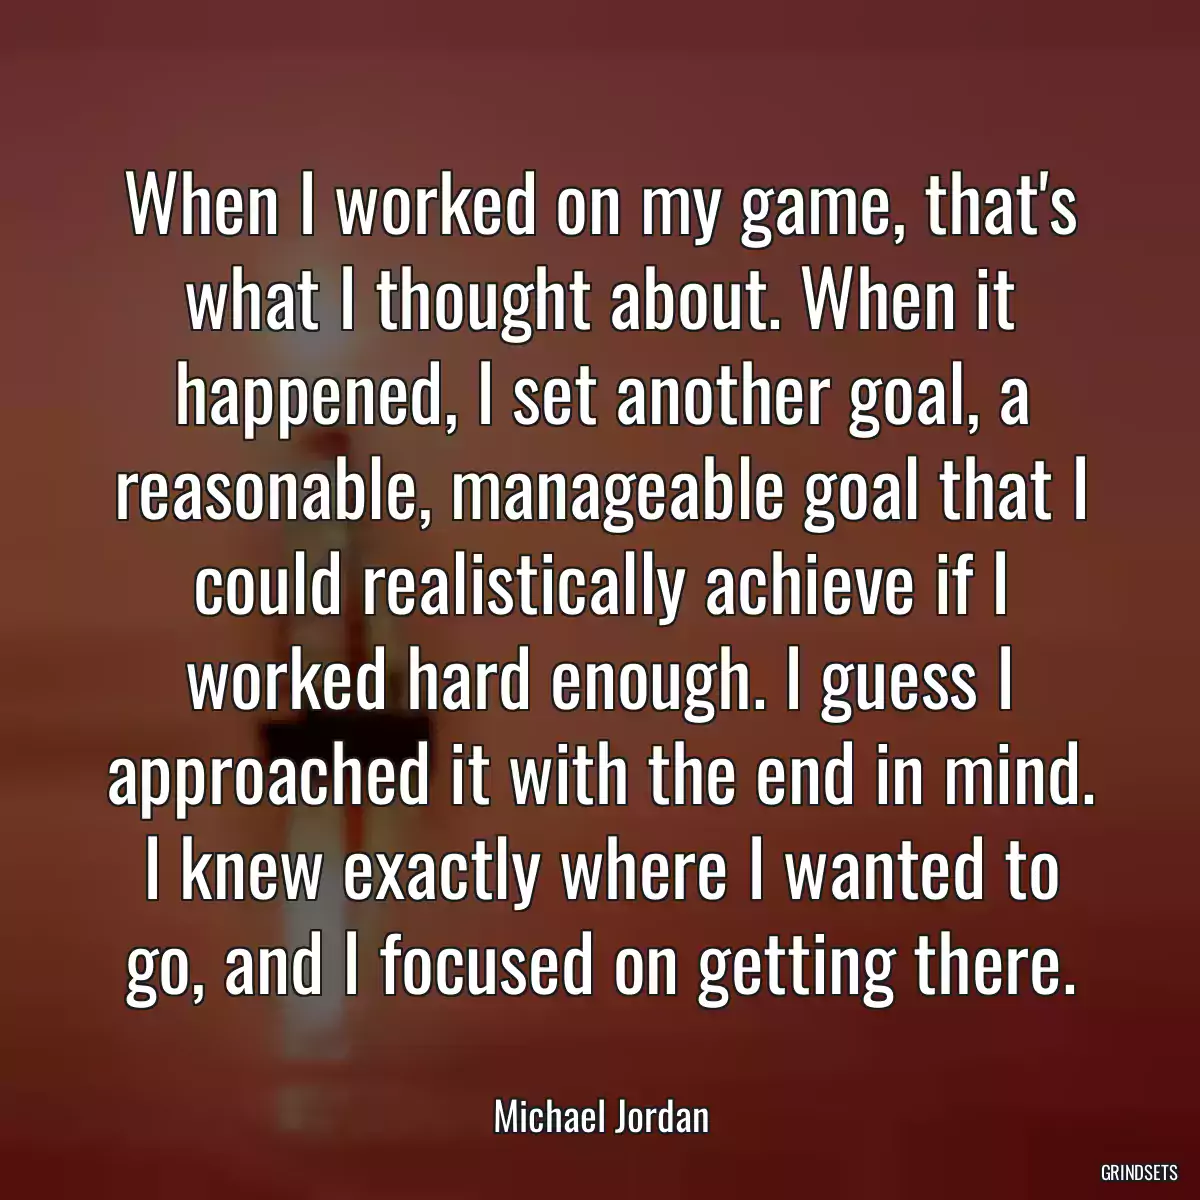 When I worked on my game, that\'s what I thought about. When it happened, I set another goal, a reasonable, manageable goal that I could realistically achieve if I worked hard enough. I guess I approached it with the end in mind. I knew exactly where I wanted to go, and I focused on getting there.